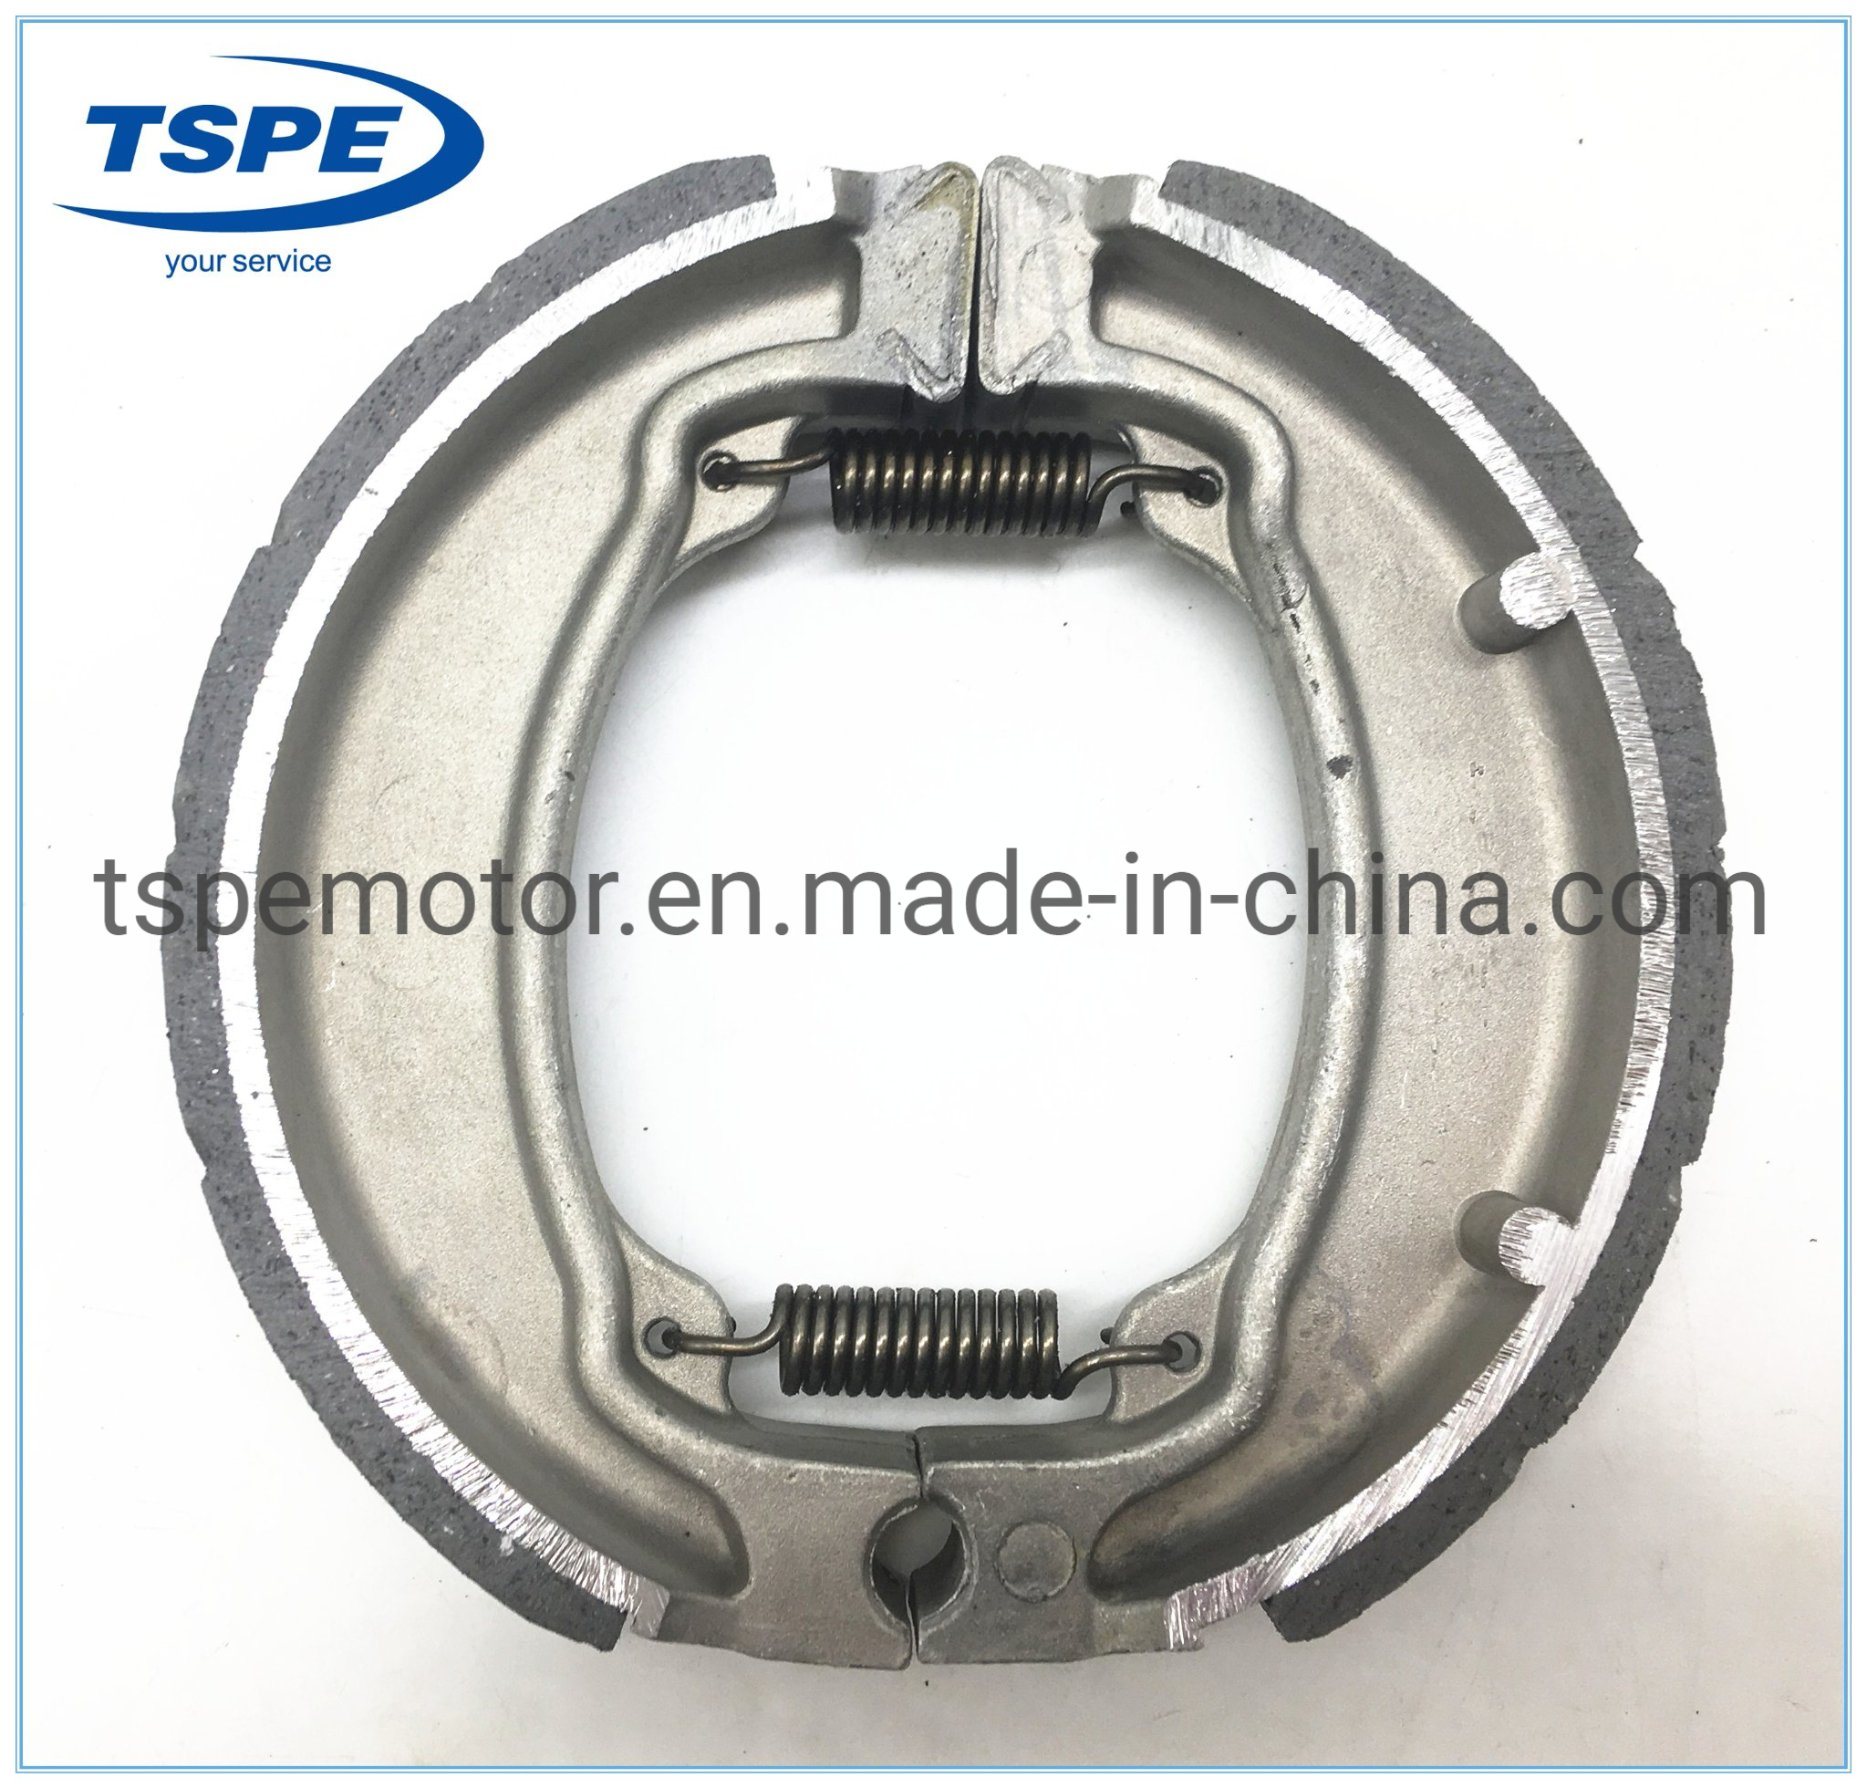 Non-Asbestos Motorcycle Brake Shoes Motorcycle Parts for FT 125